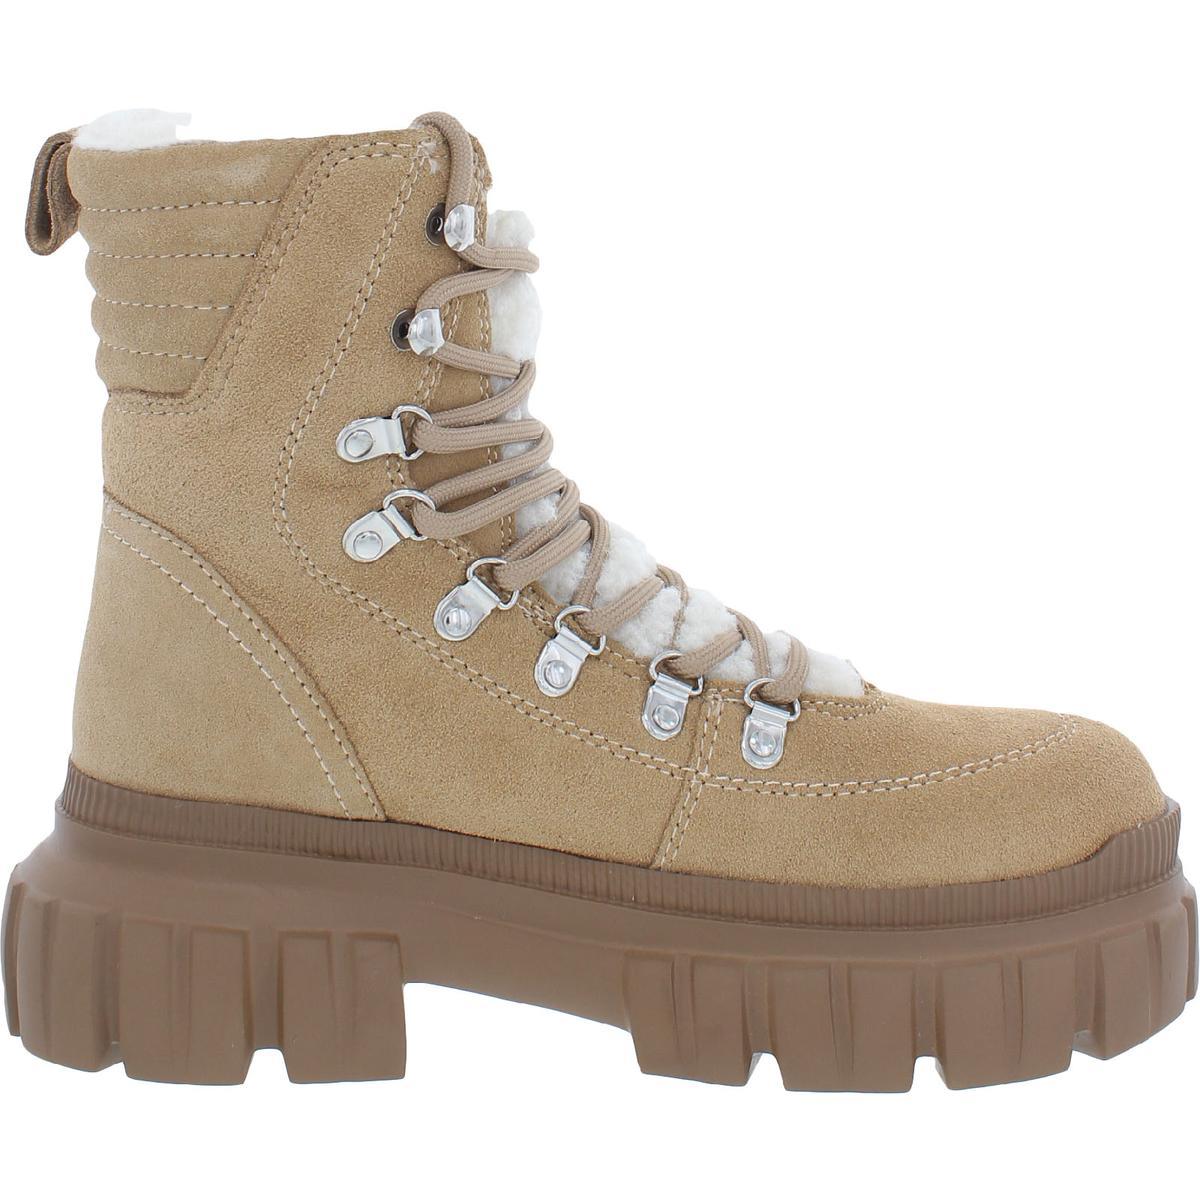 DKNY Ciara Suede Lug Sole Combat & Lace-up Boots in Natural | Lyst